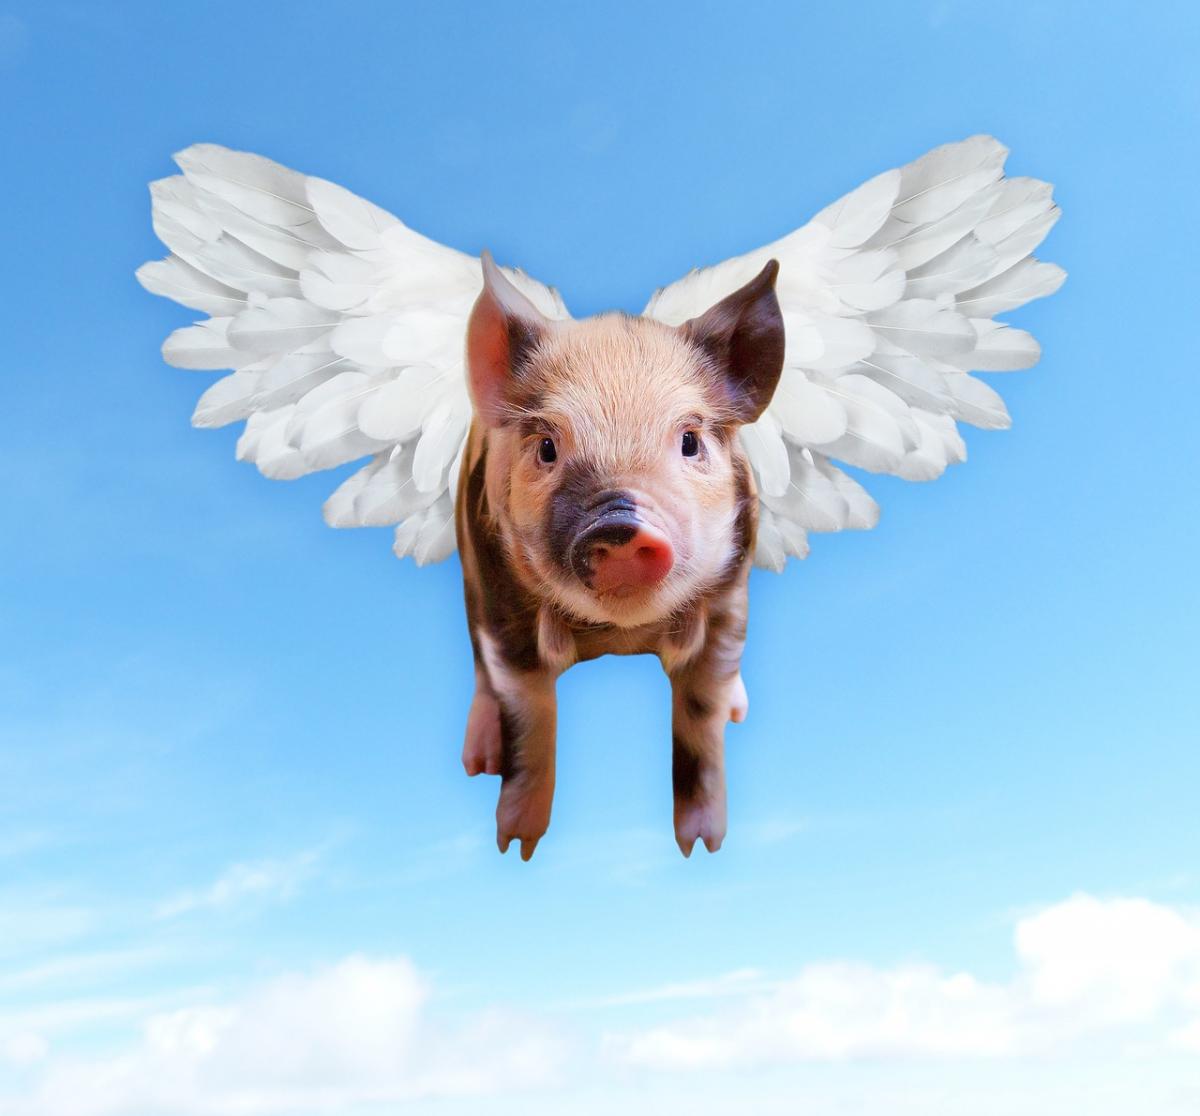 A pig with wings